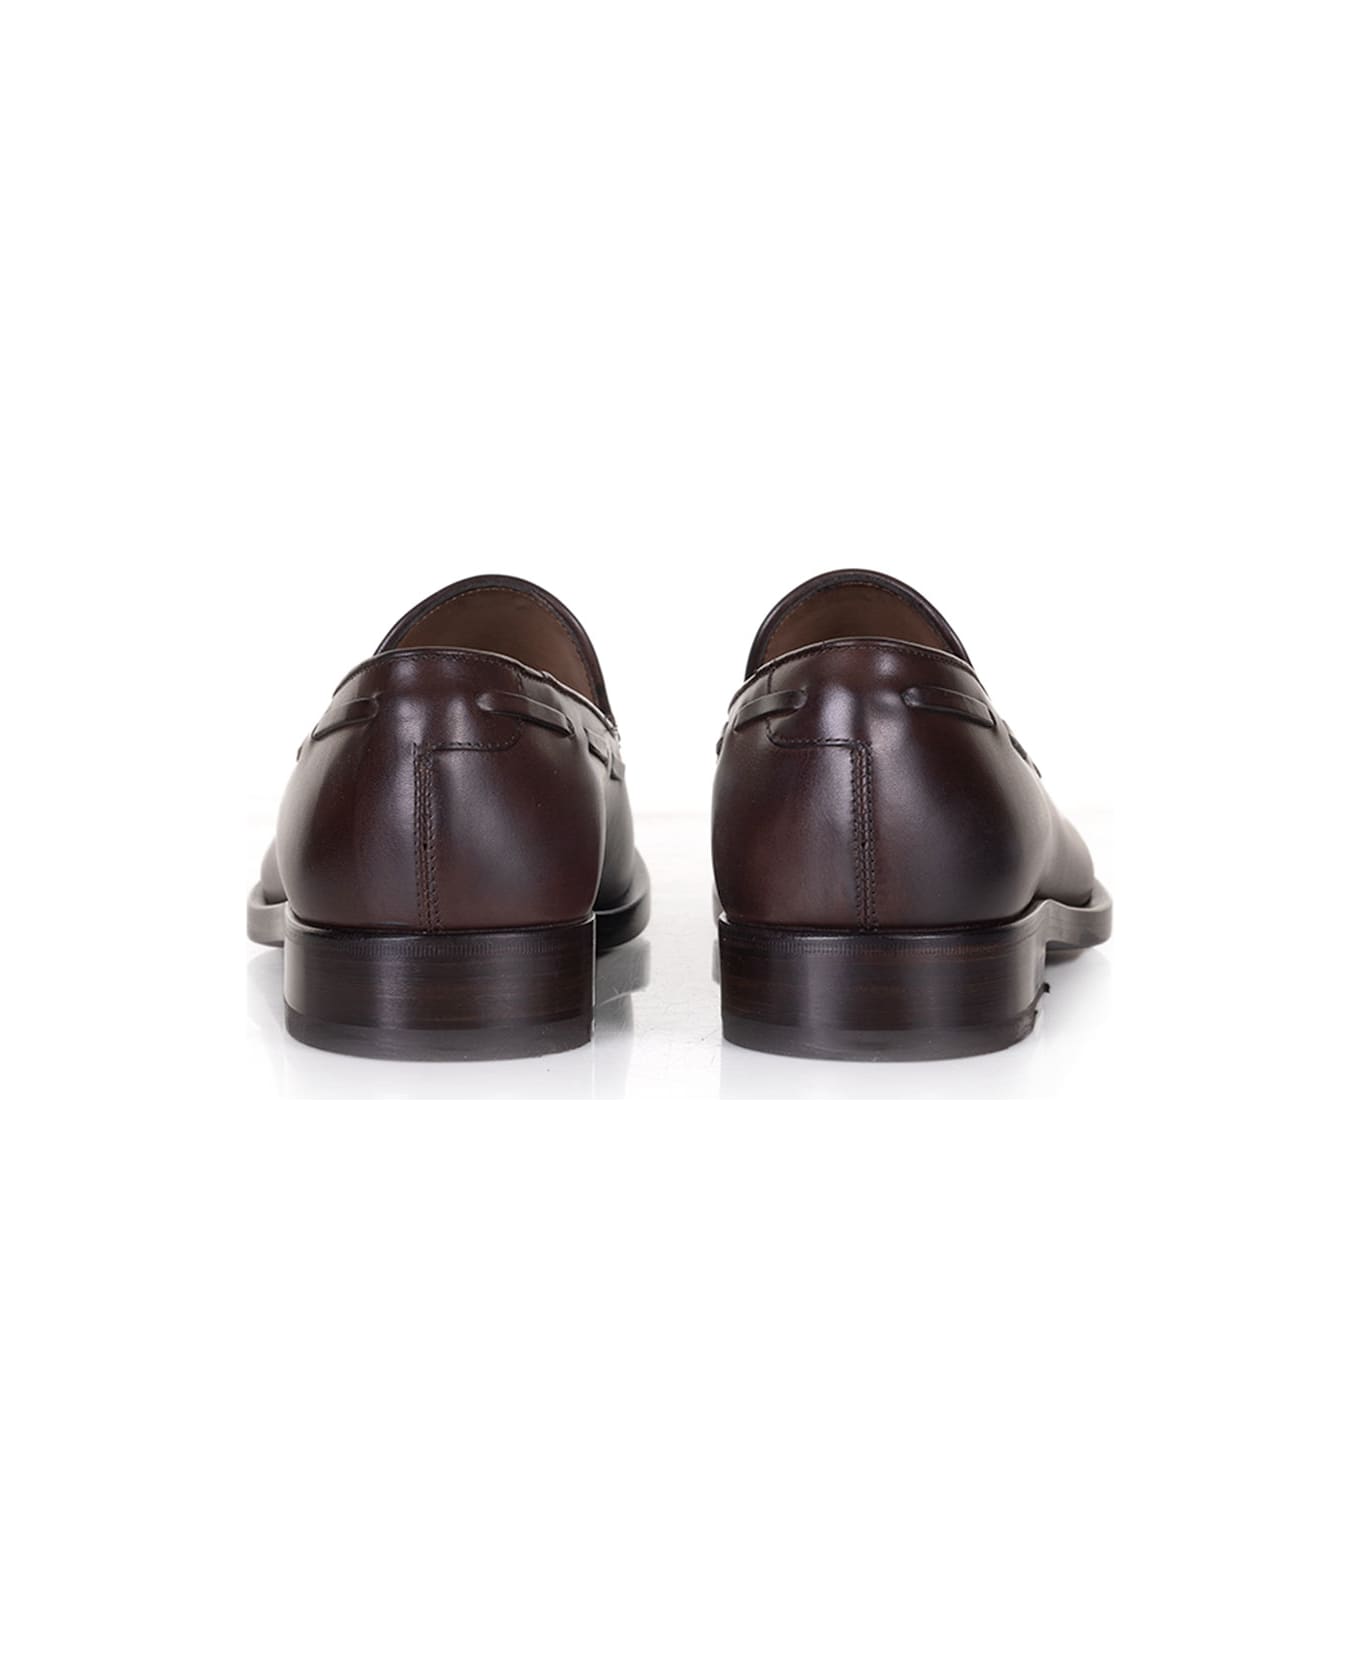 Fratelli Rossetti Leather Loafers With Tassels - MOGANO